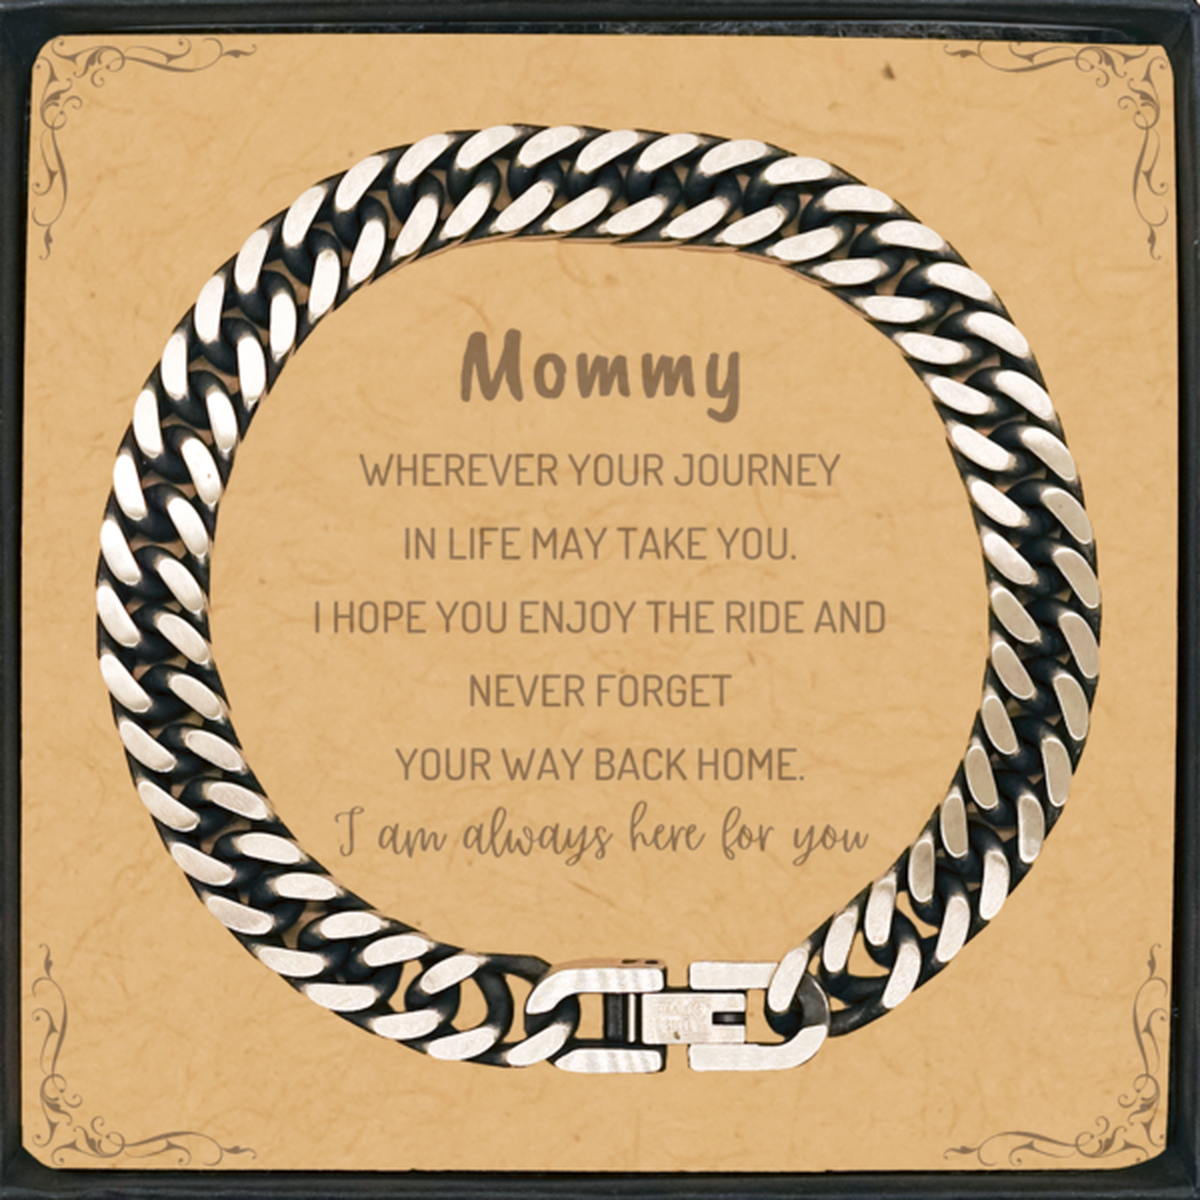 Mommy wherever your journey in life may take you, I am always here for you Mommy Cuban Link Chain Bracelet, Awesome Christmas Gifts For Mommy Message Card, Mommy Birthday Gifts for Men Women Family Loved One